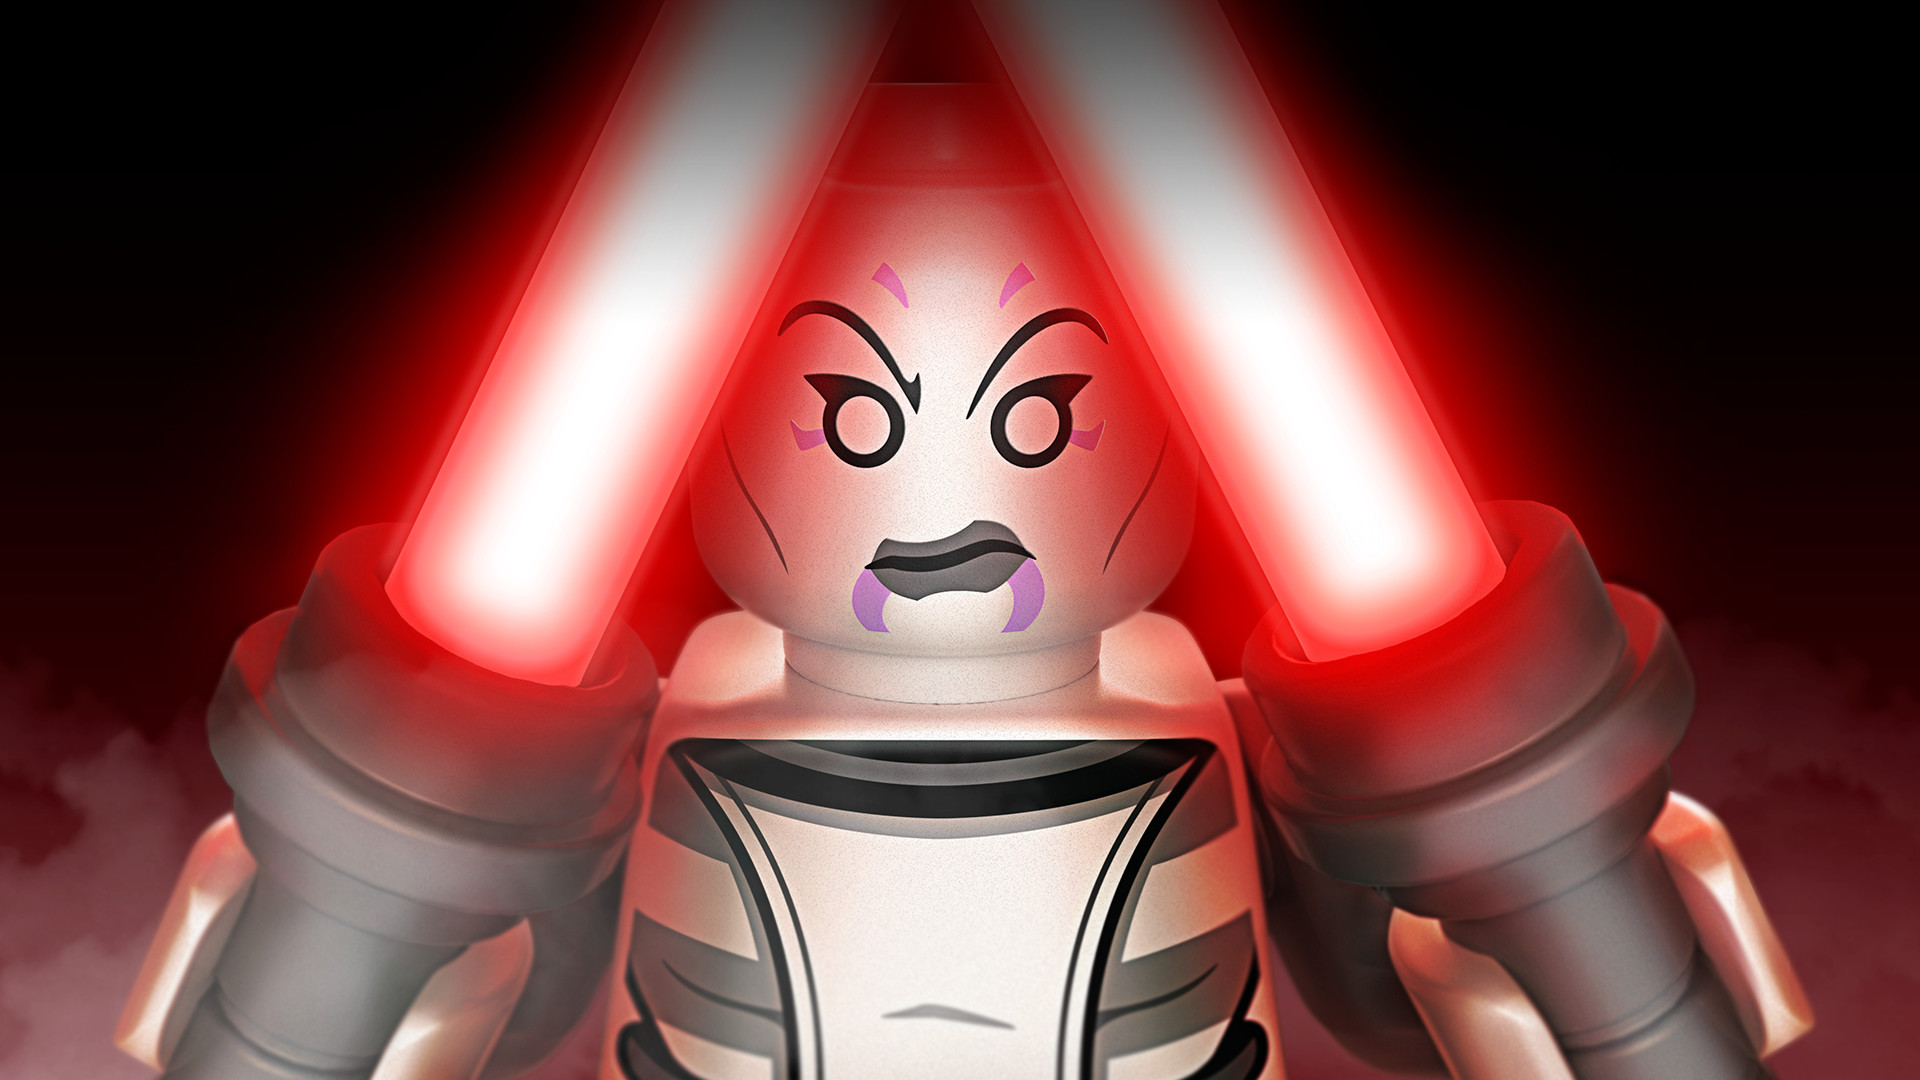 LEGO Star Wars: The Force Awakens - The Clone Wars Character Pack DLC Steam CD Key $1.68